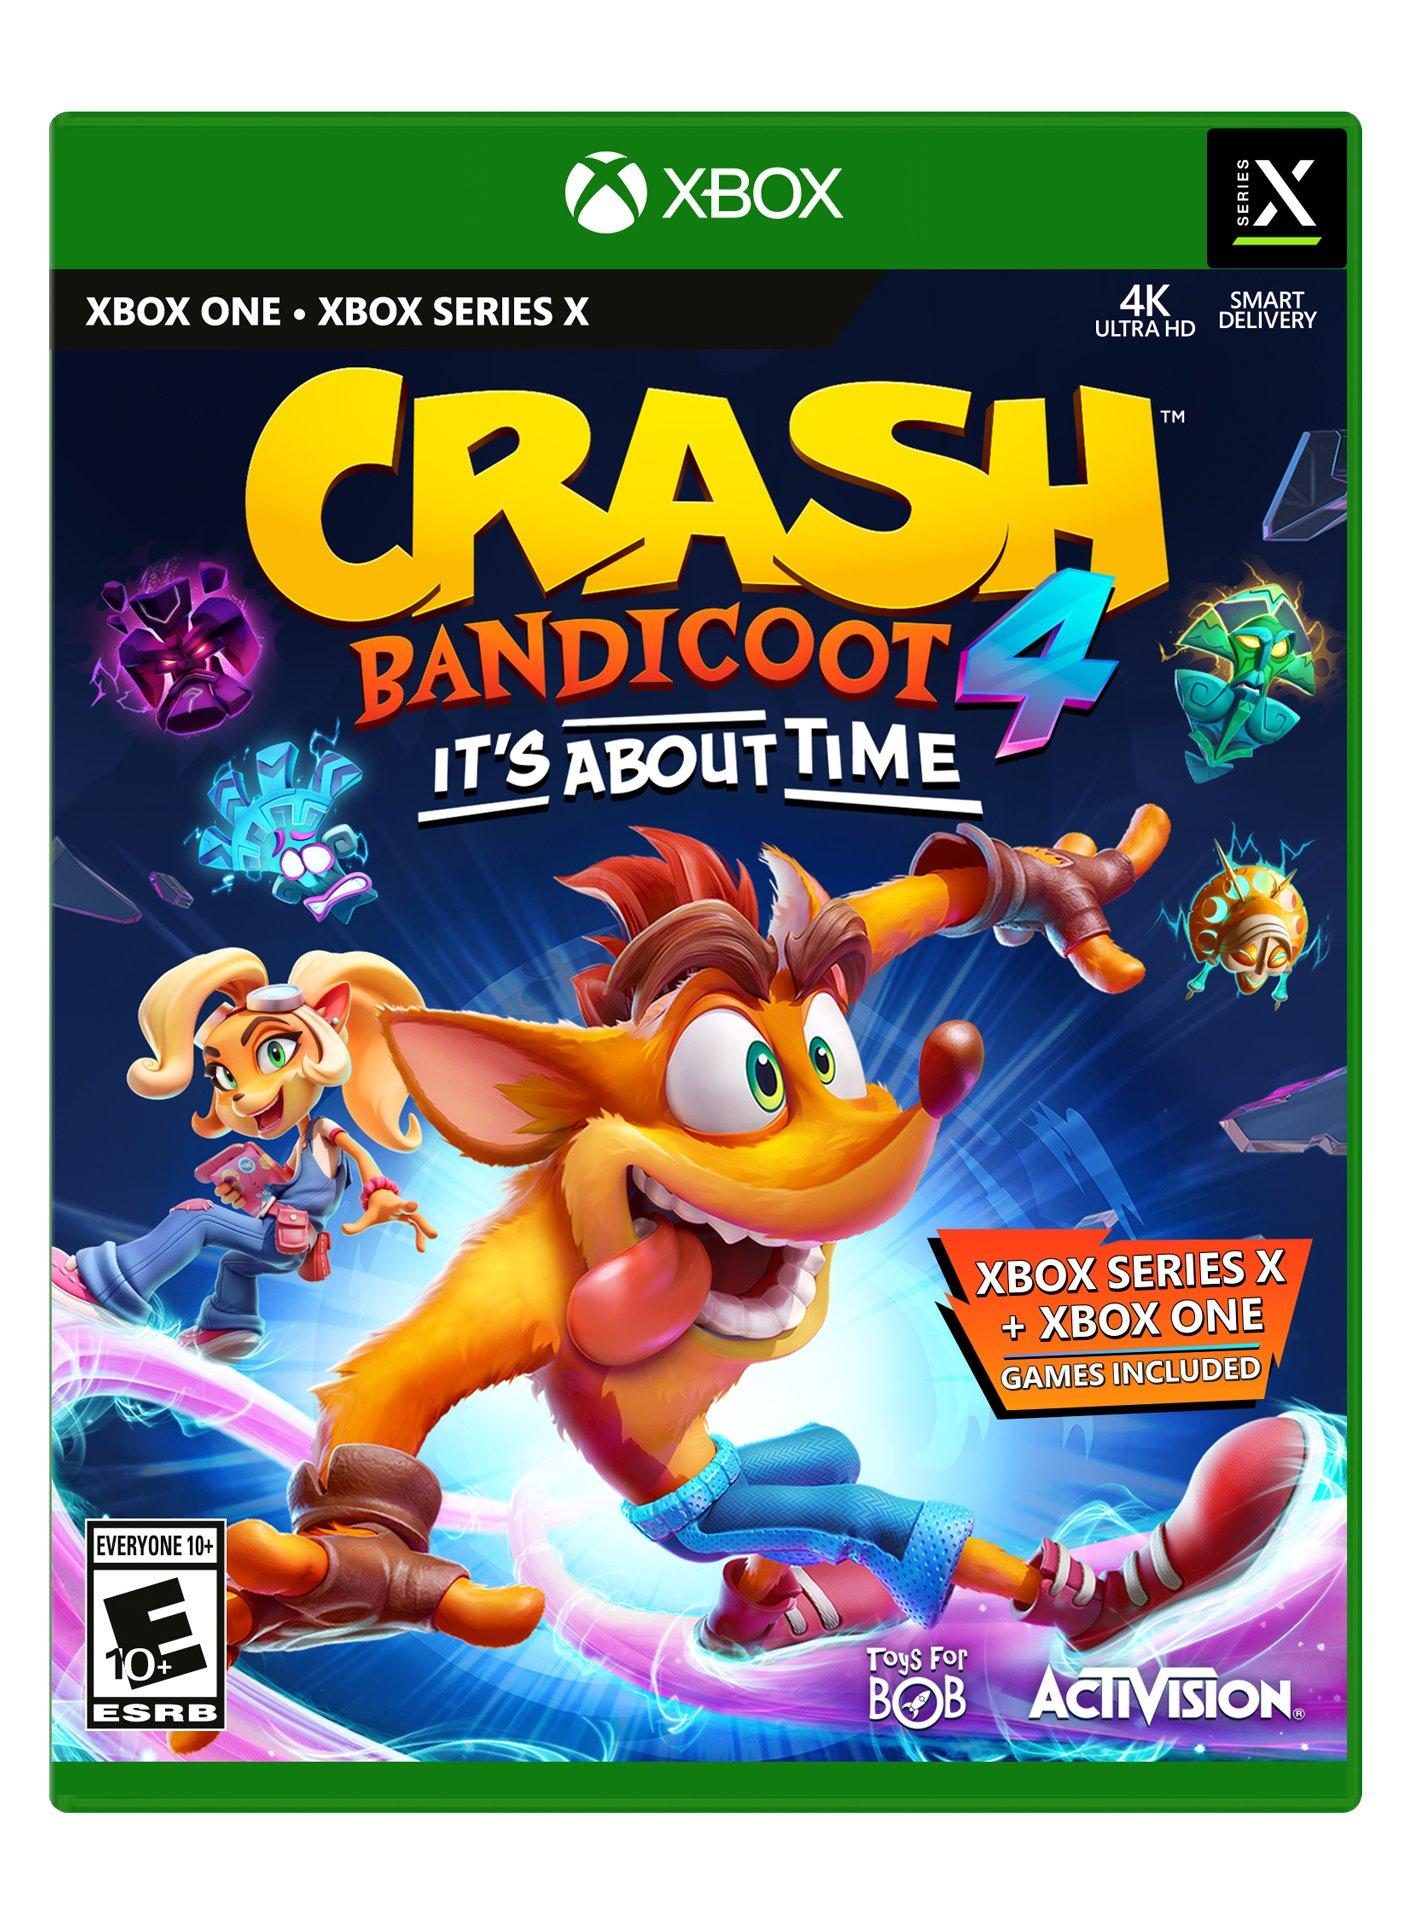 Crash Bandicoot 4 - It's About Time - Video Game Cover Trading Card (new)